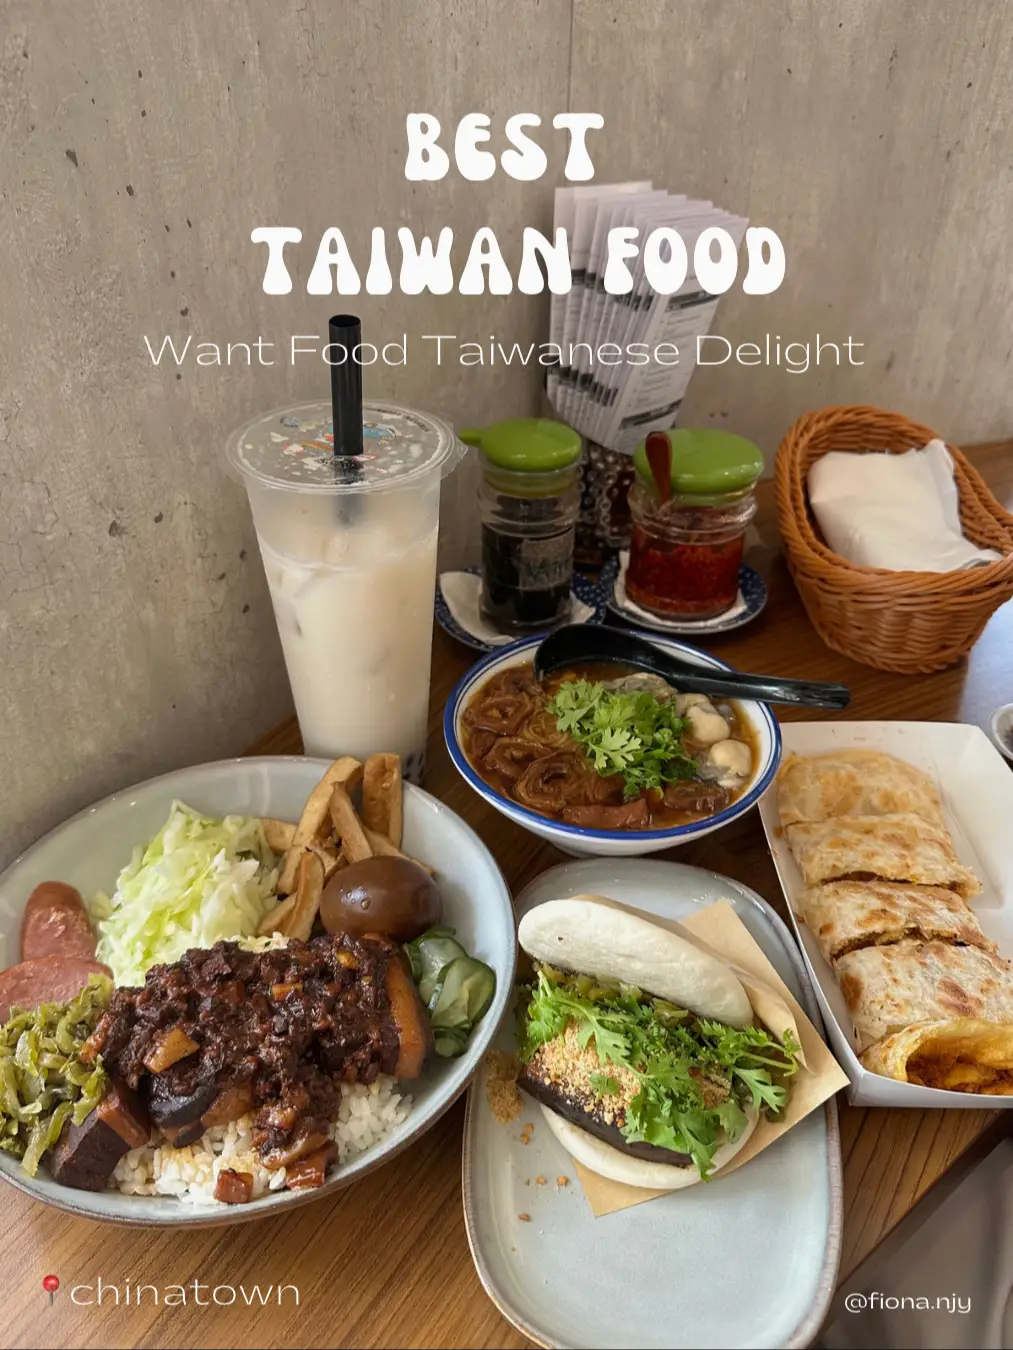 Must try Taiwanese food in SG 's images(0)